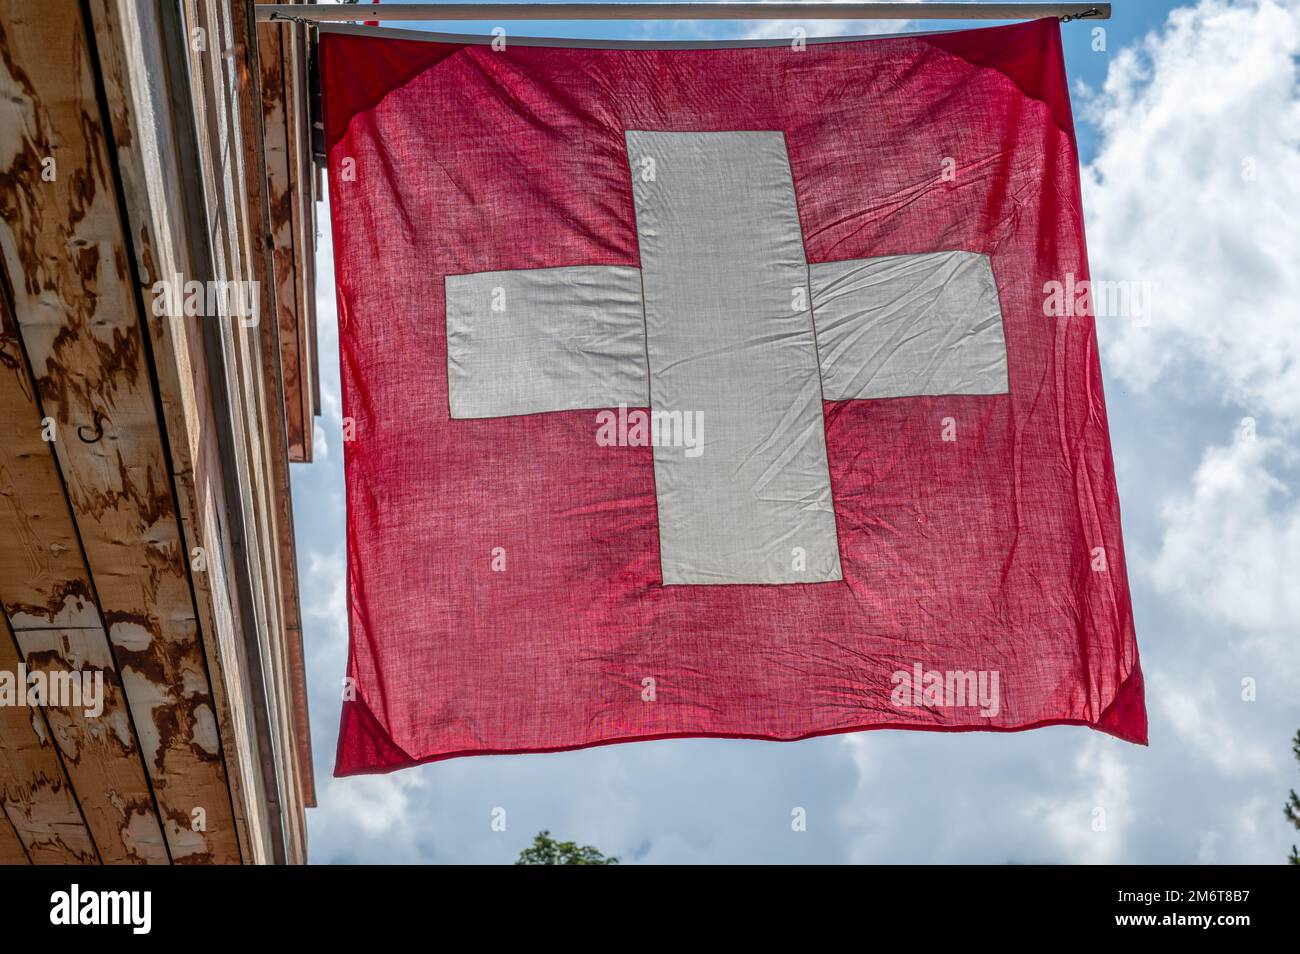 Swiss flag. Switzerland flag hanging on roof against blue sky. One red square flag with a white cross in the centre. Objects. Stock Photo